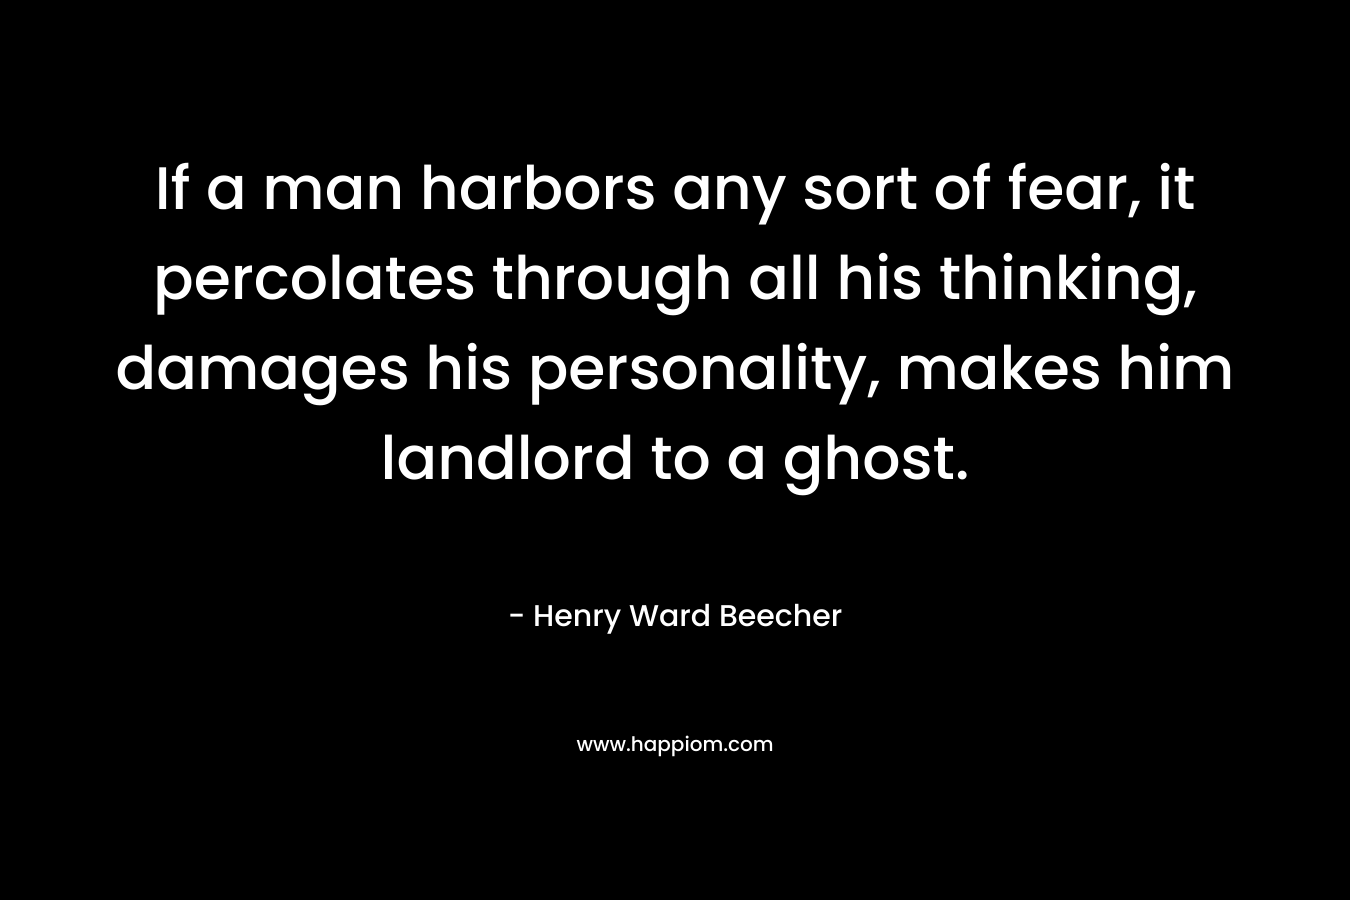 If a man harbors any sort of fear, it percolates through all his thinking, damages his personality, makes him landlord to a ghost.